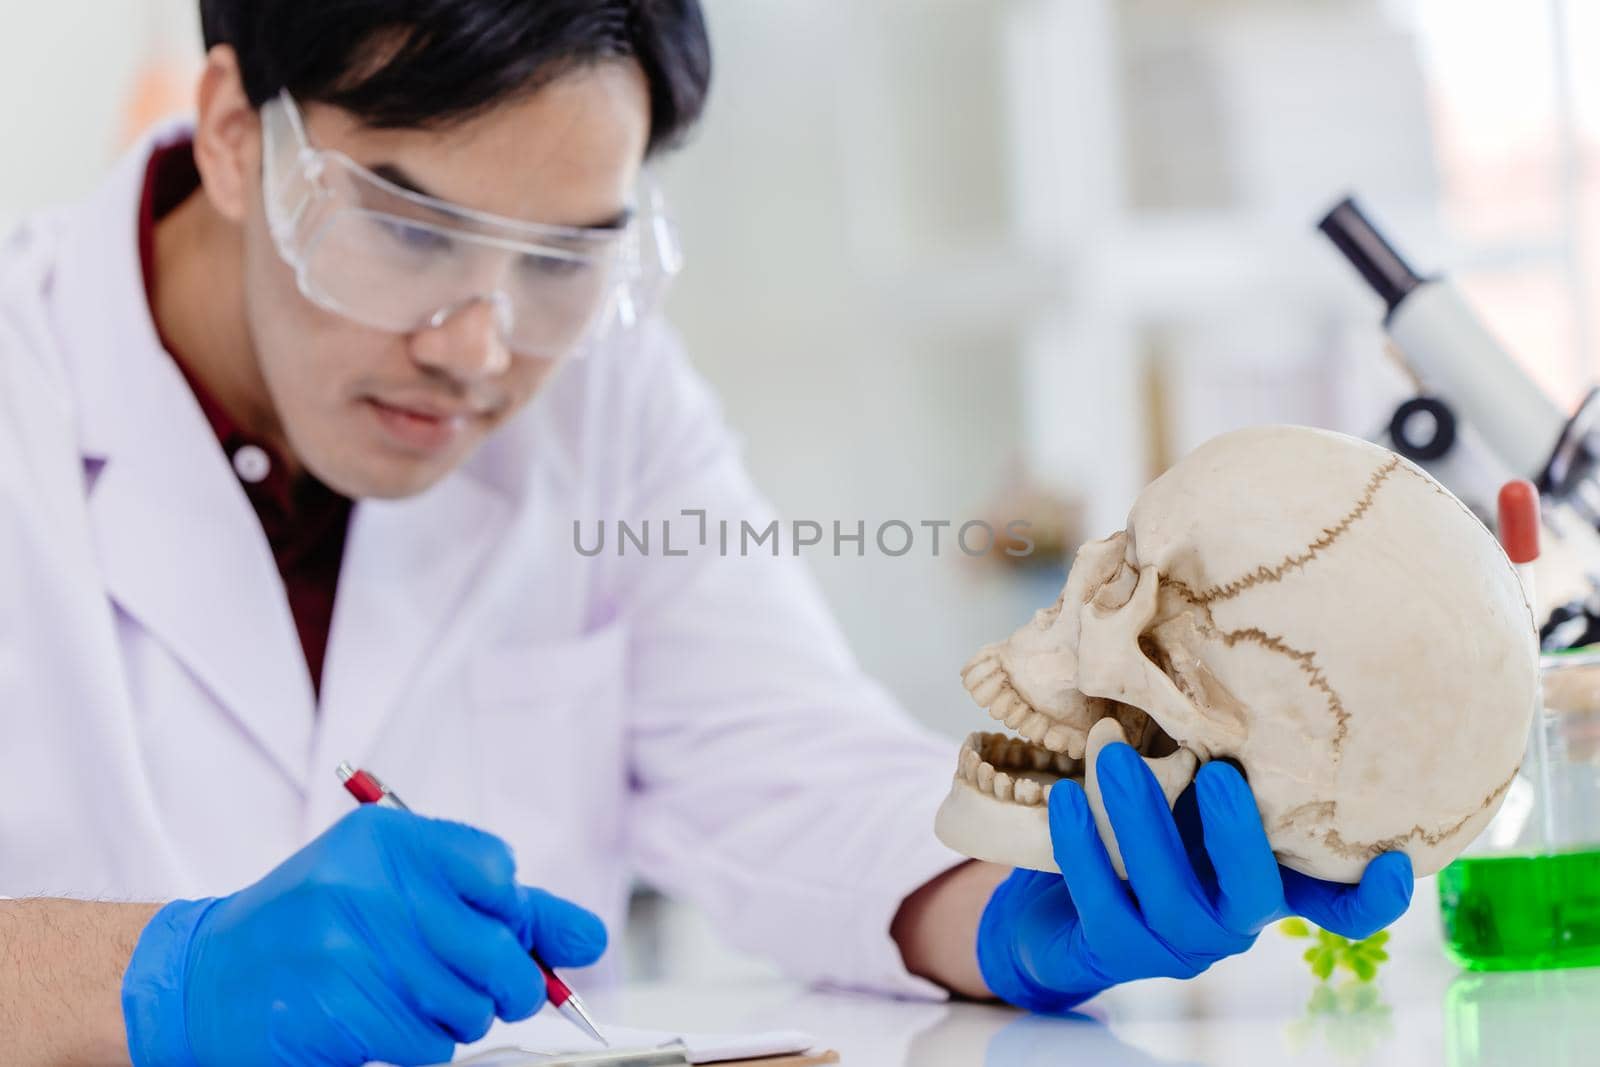 Asian Male working in Physical Scientist and Anthropology in biology science lab research study in human bone and skull.